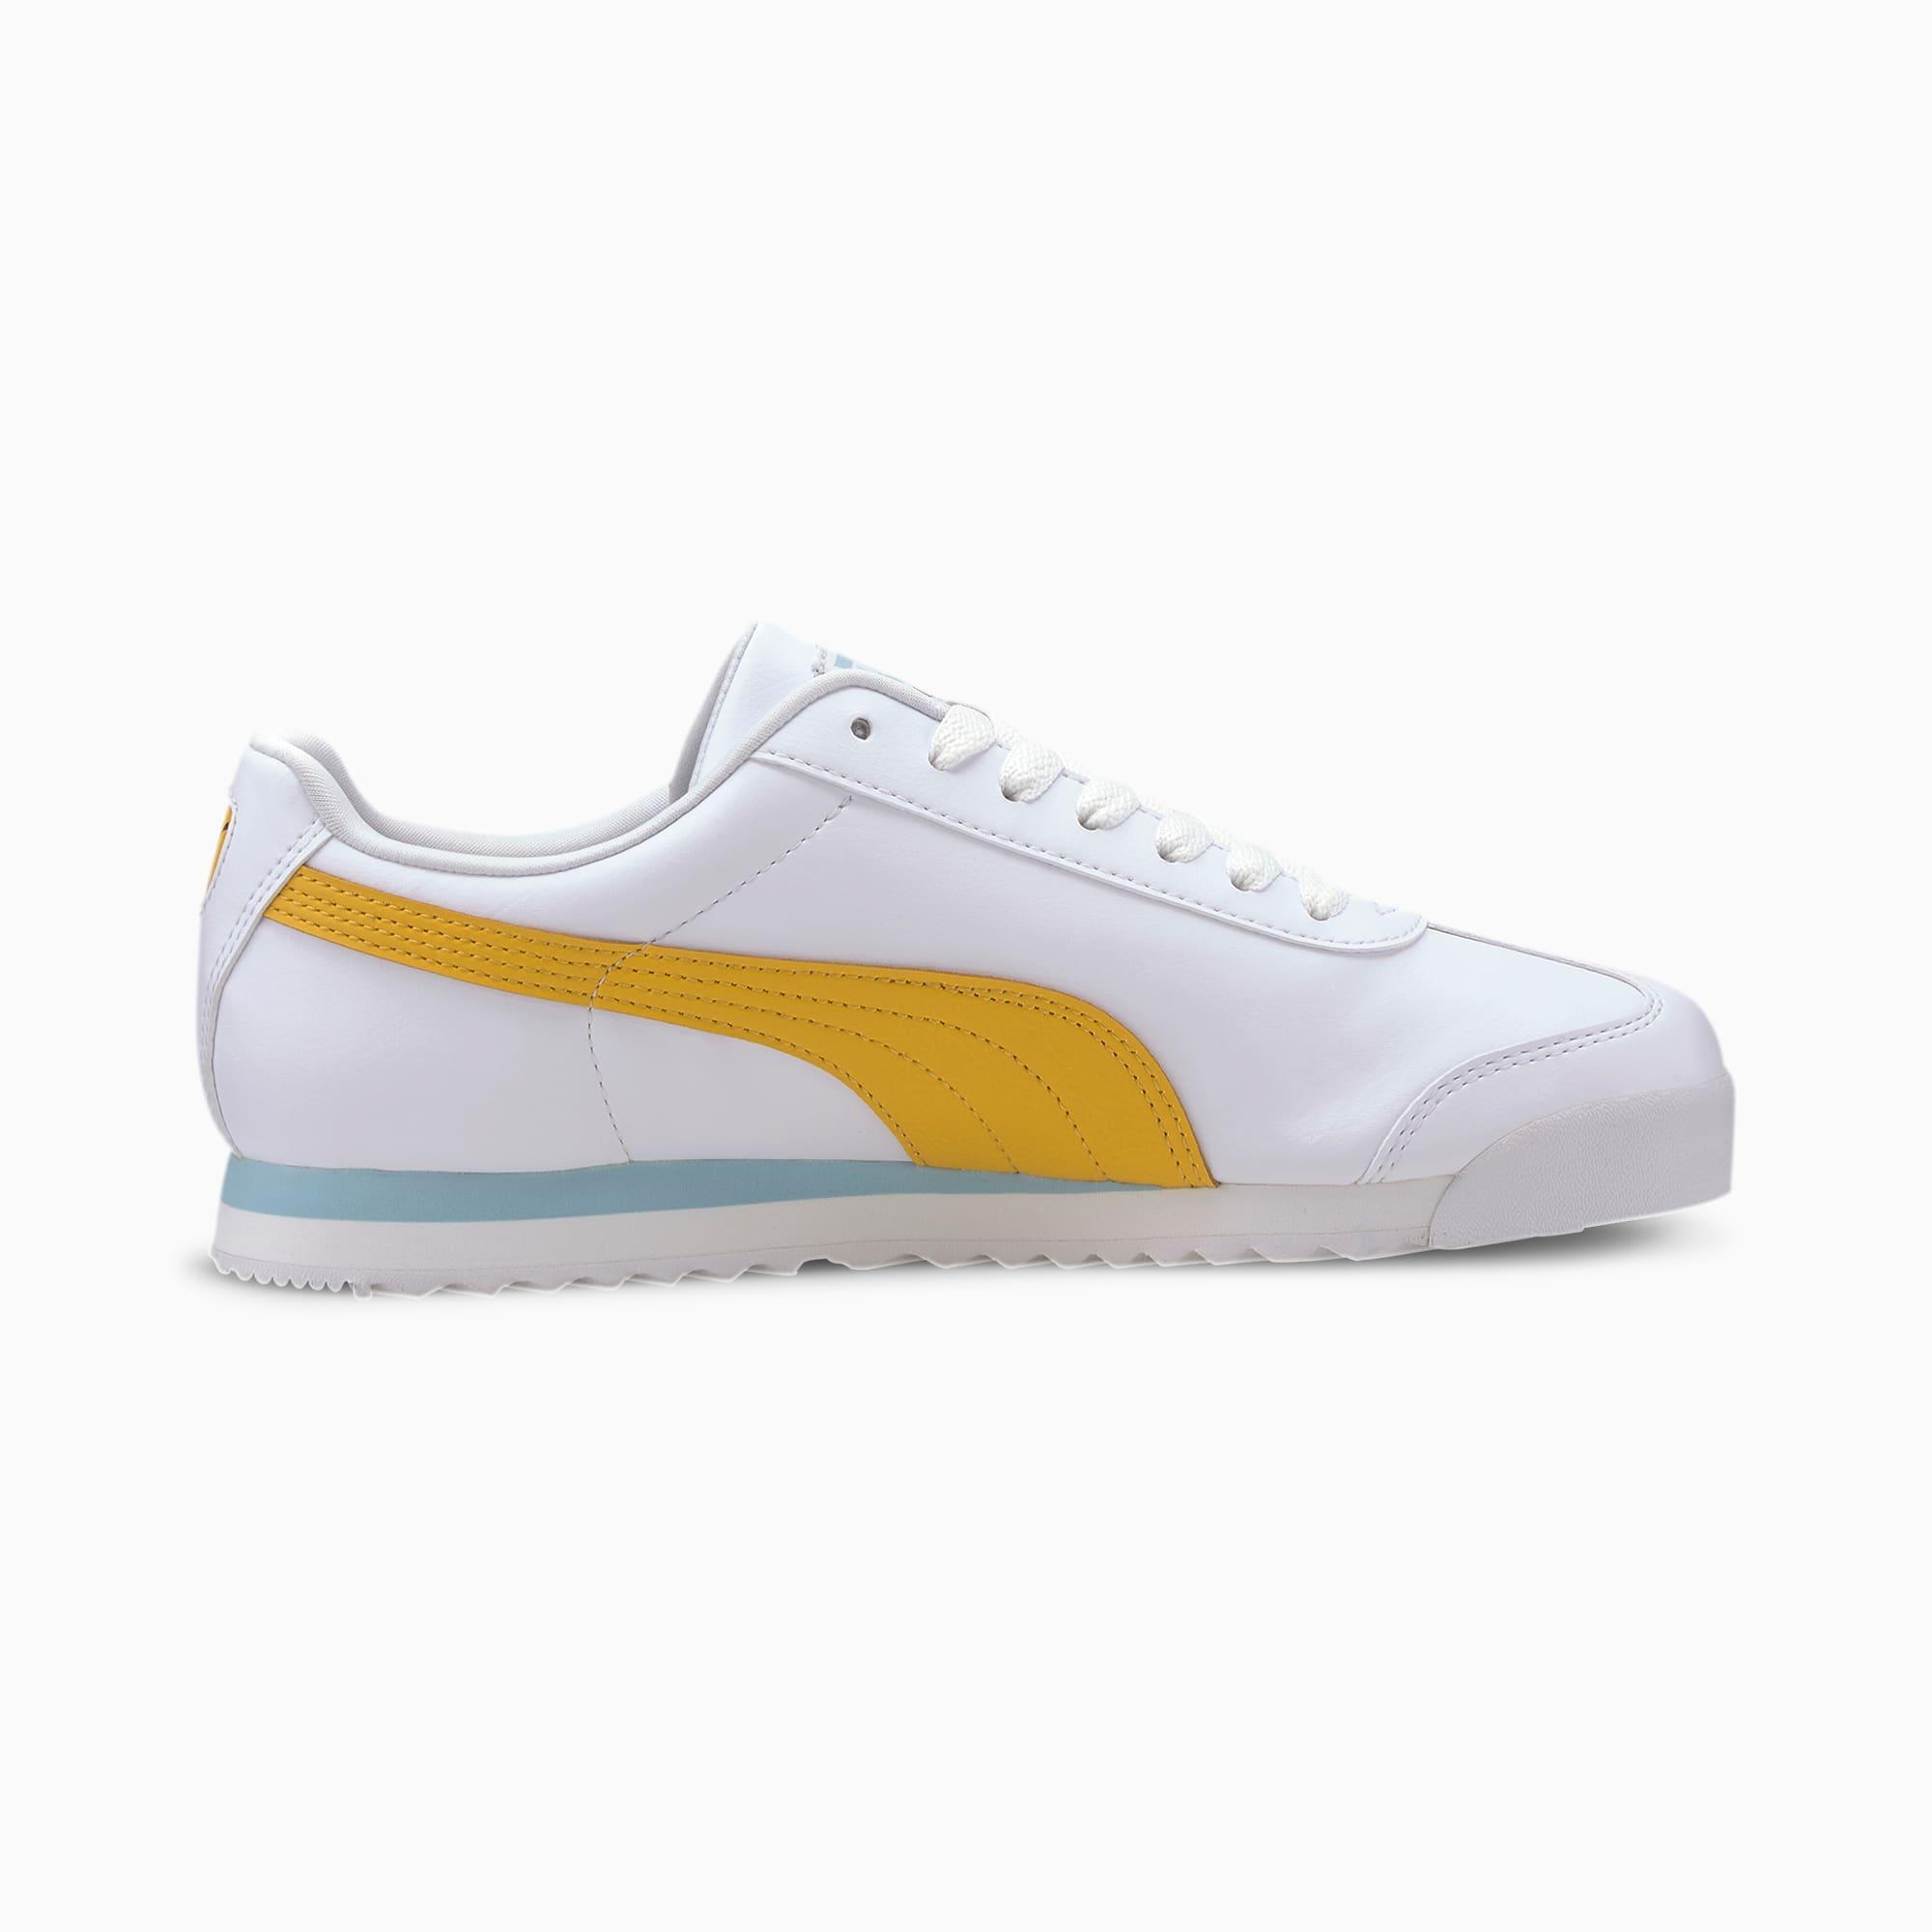 PUMA Leather Roma Basic+ Sneakers in White for Men - Lyst